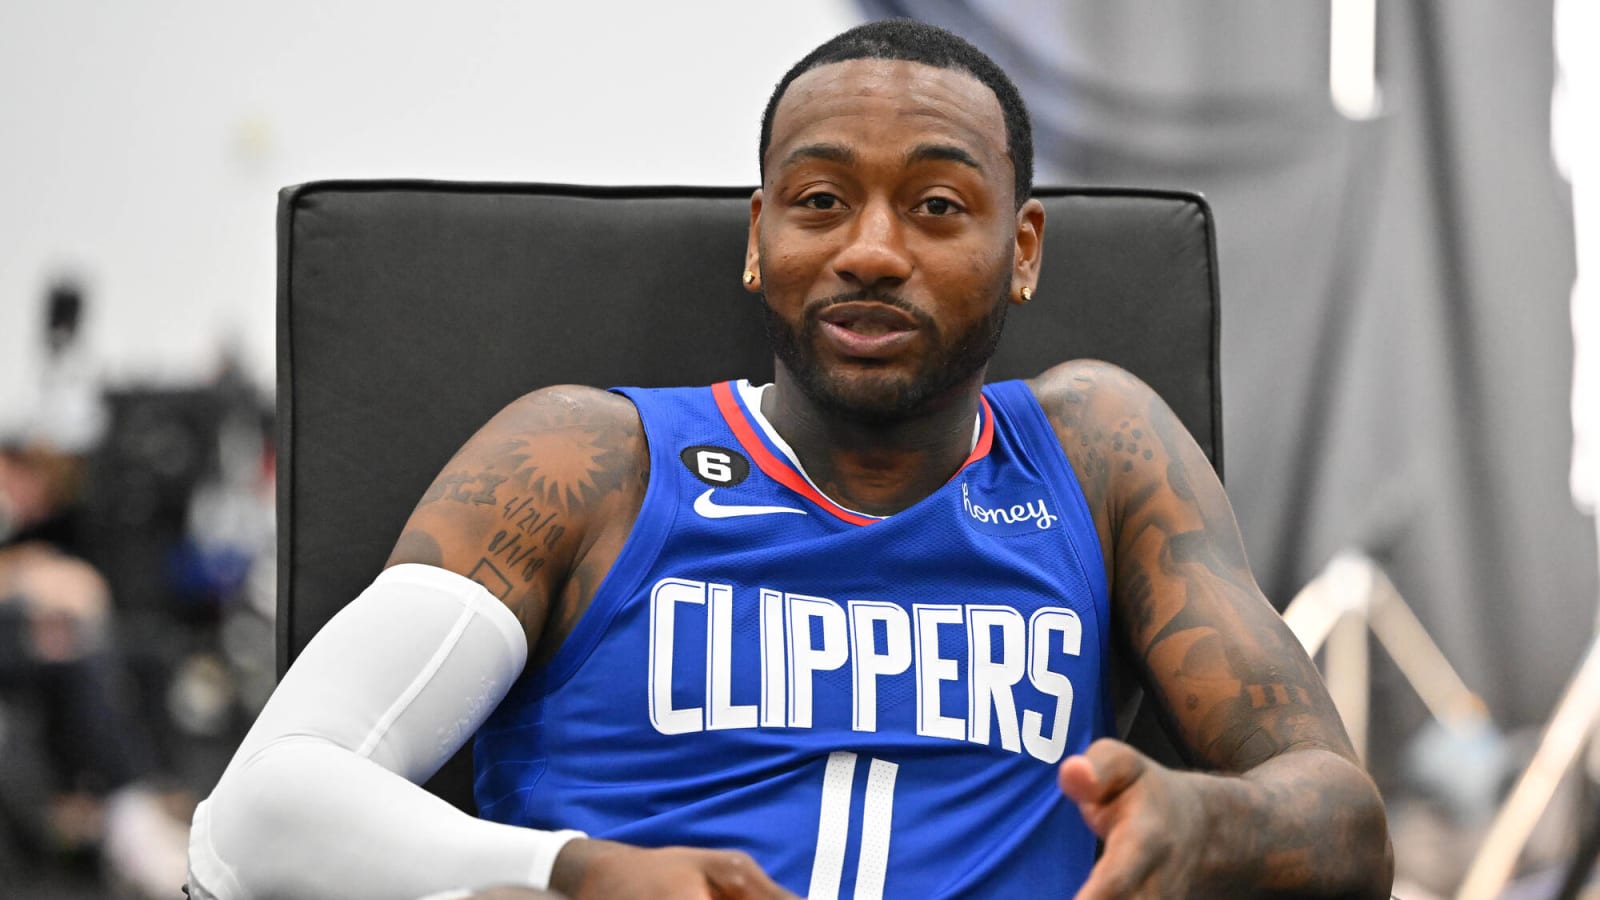 John Wall healthy and ready to play for Los Angeles Clippers